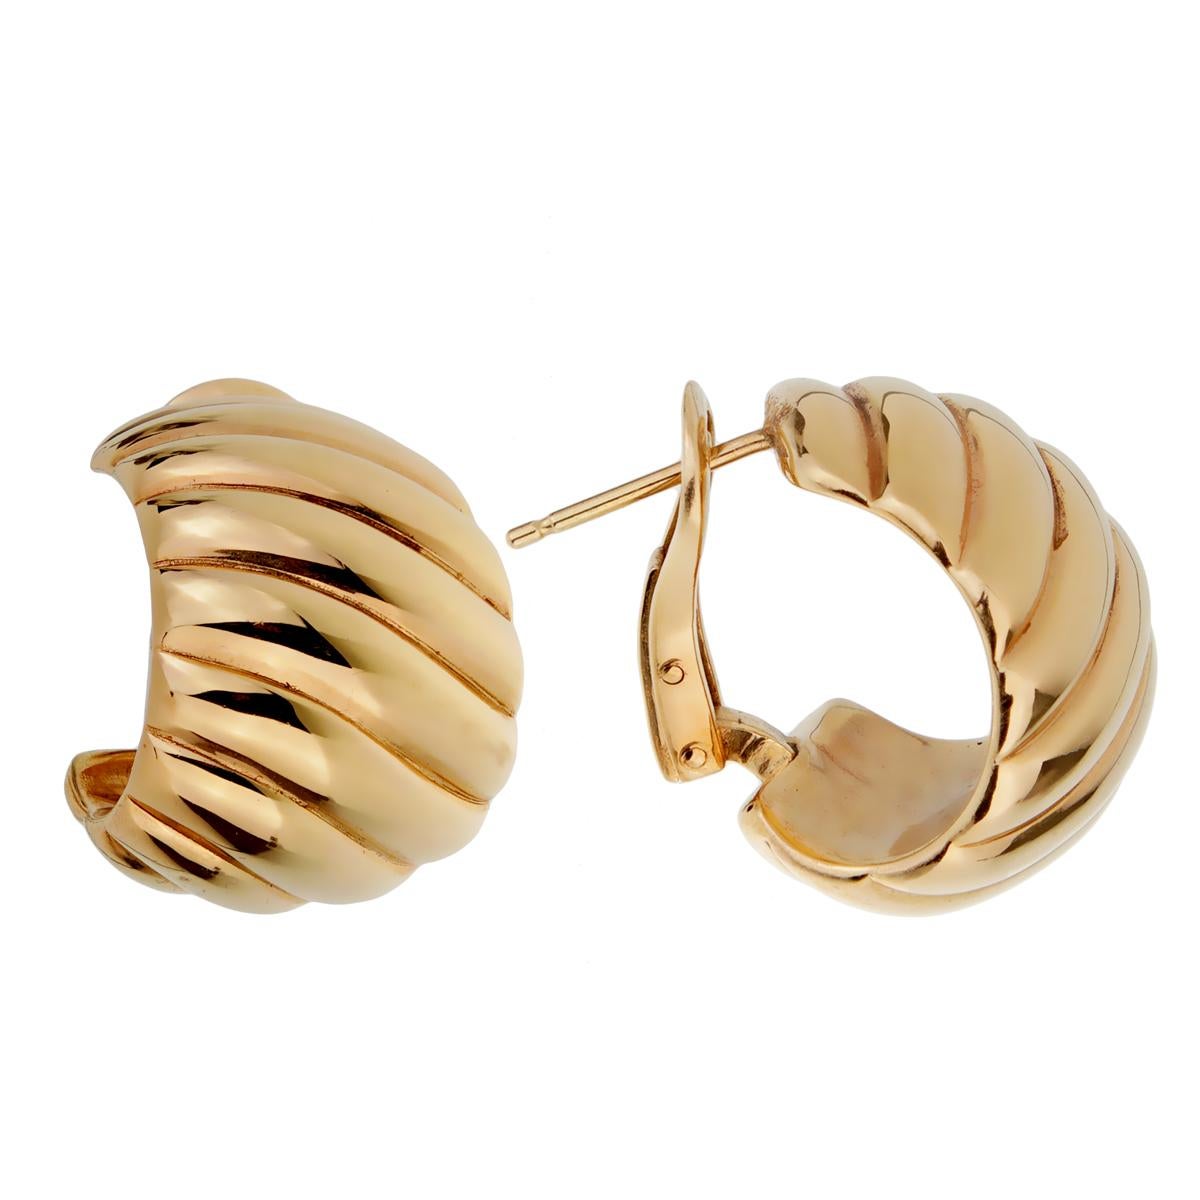 A fabulous pair of vintage Van Cleef and Arpels earrings featuring a waved design in polished 18k yellow gold. These classic gold earrings are perfect for everyday wear.

The earrings measures .82